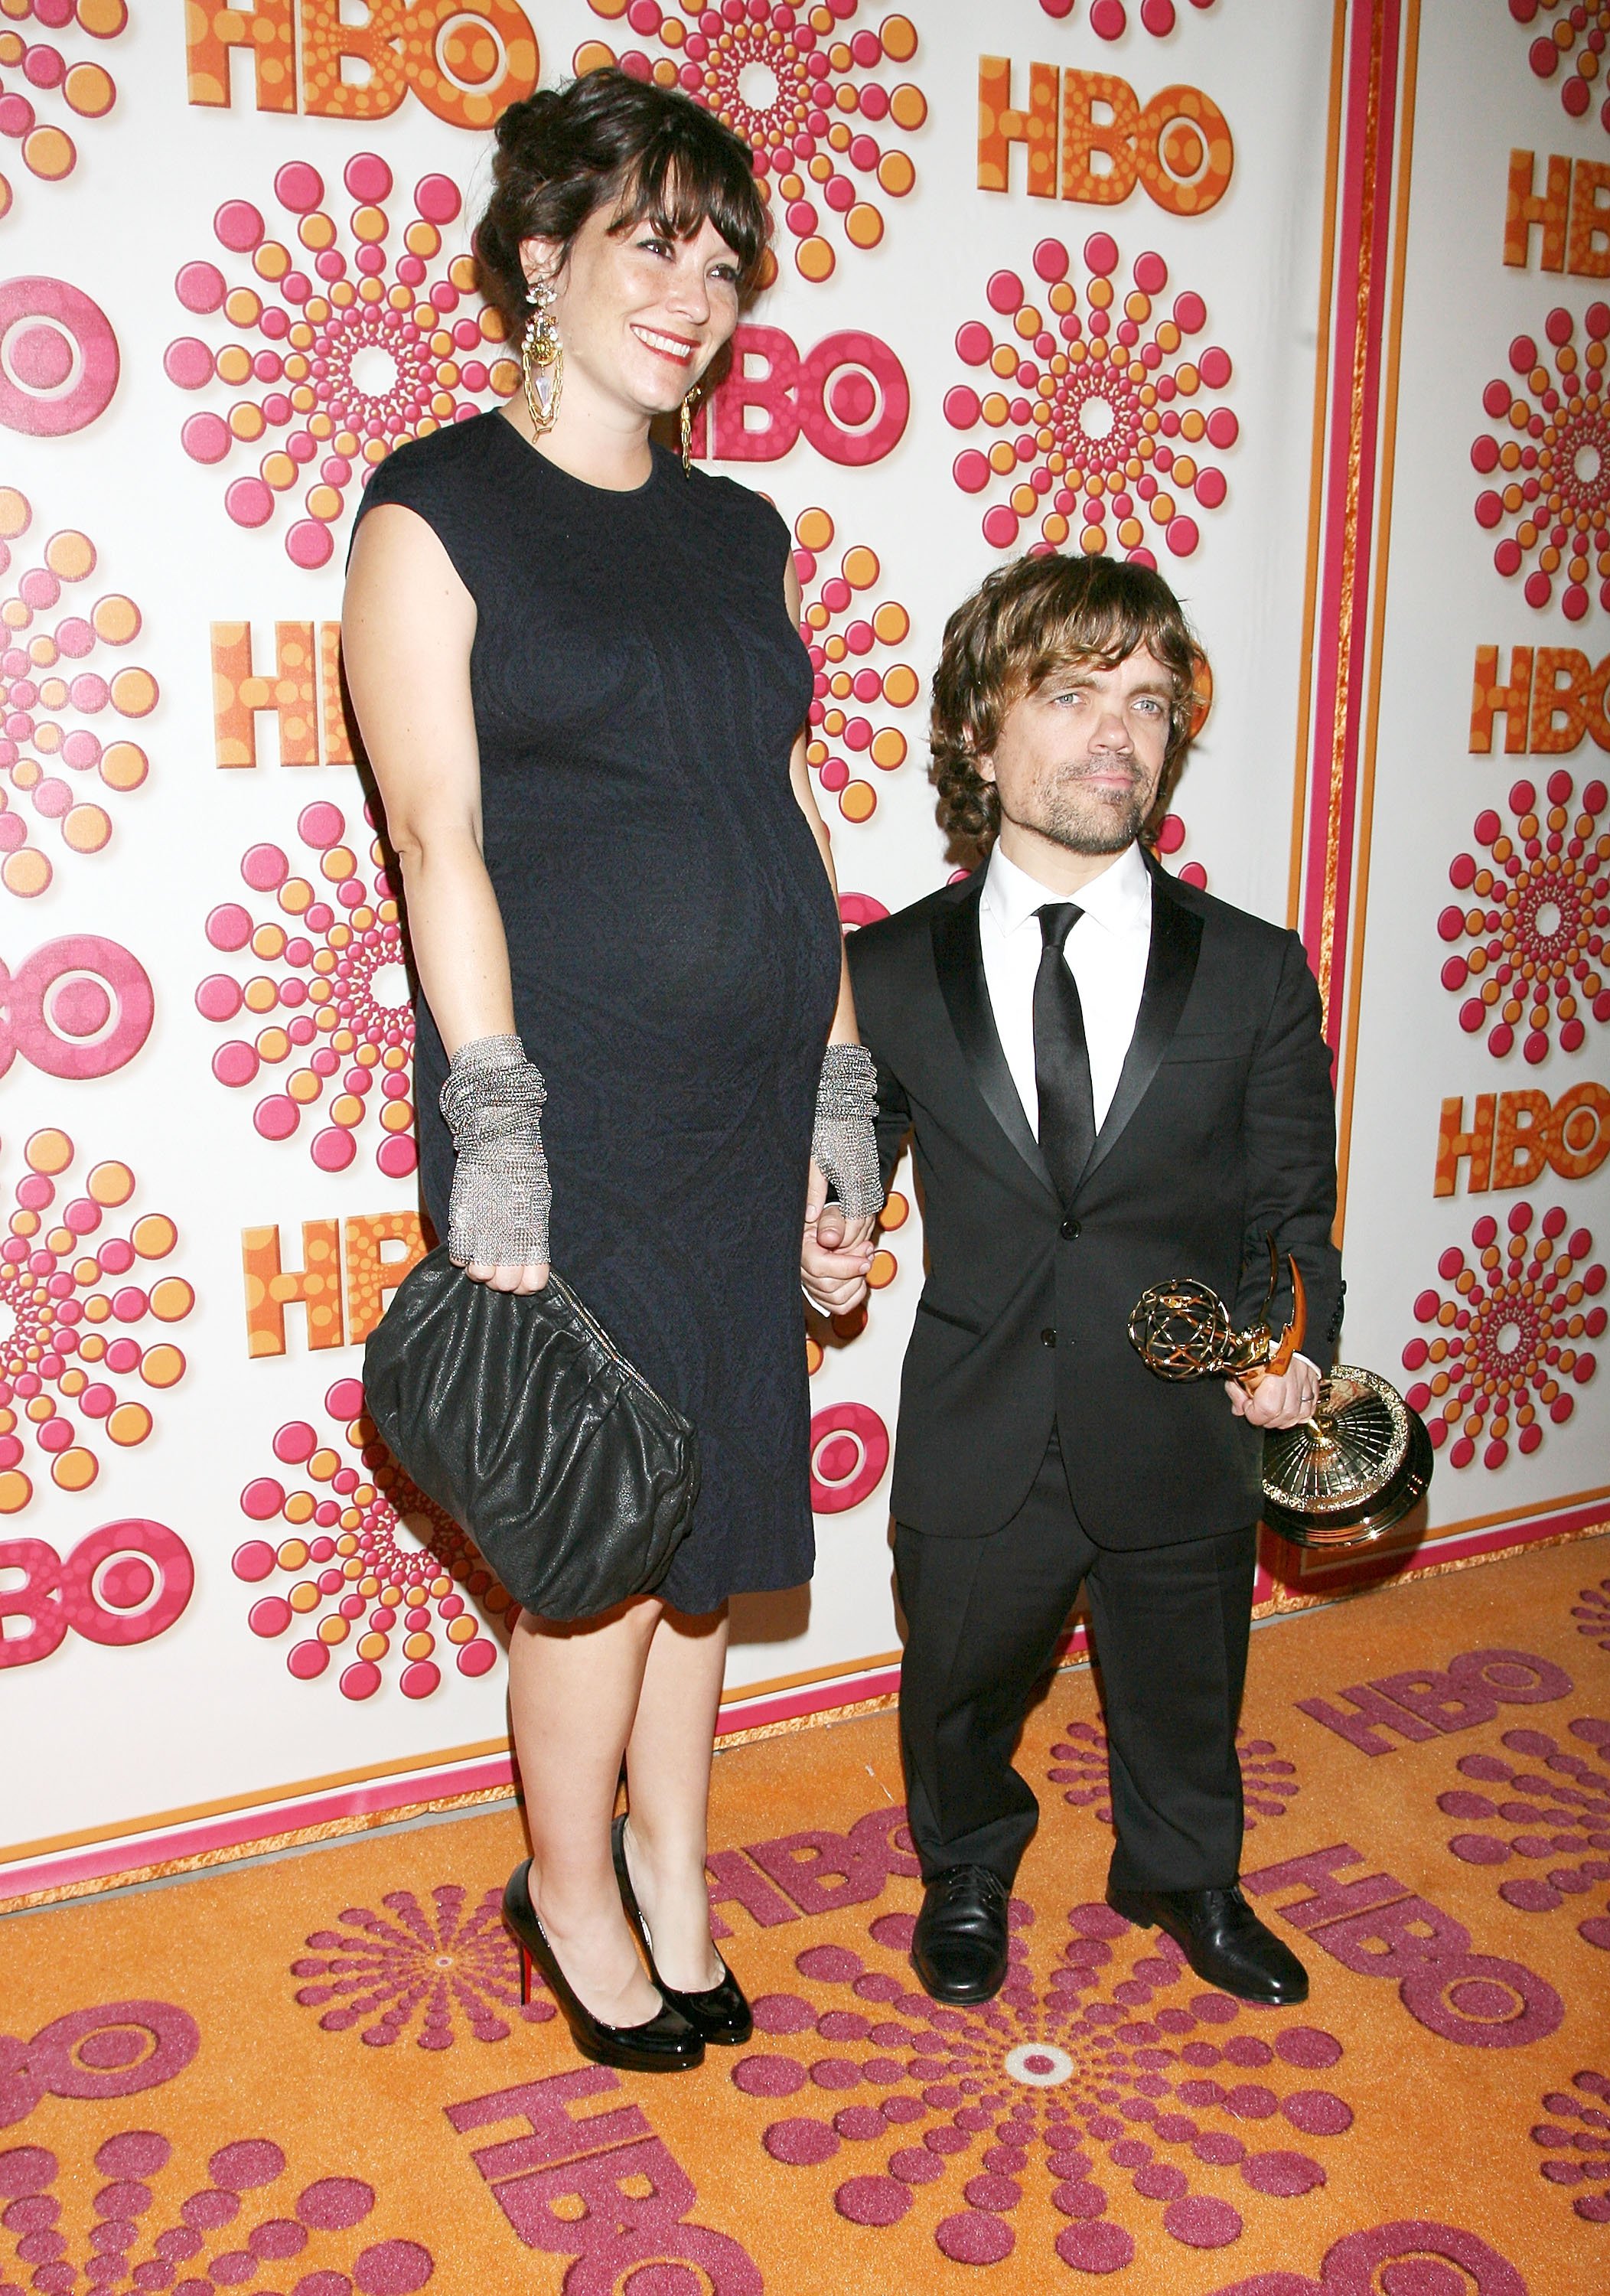 Peter Dinklage and Erica Schmidt during HBO's Official Emmy After Party at The Plaza at the Pacific Design Center on September 18, 2011 in Los Angeles, California. | Source: Getty Images